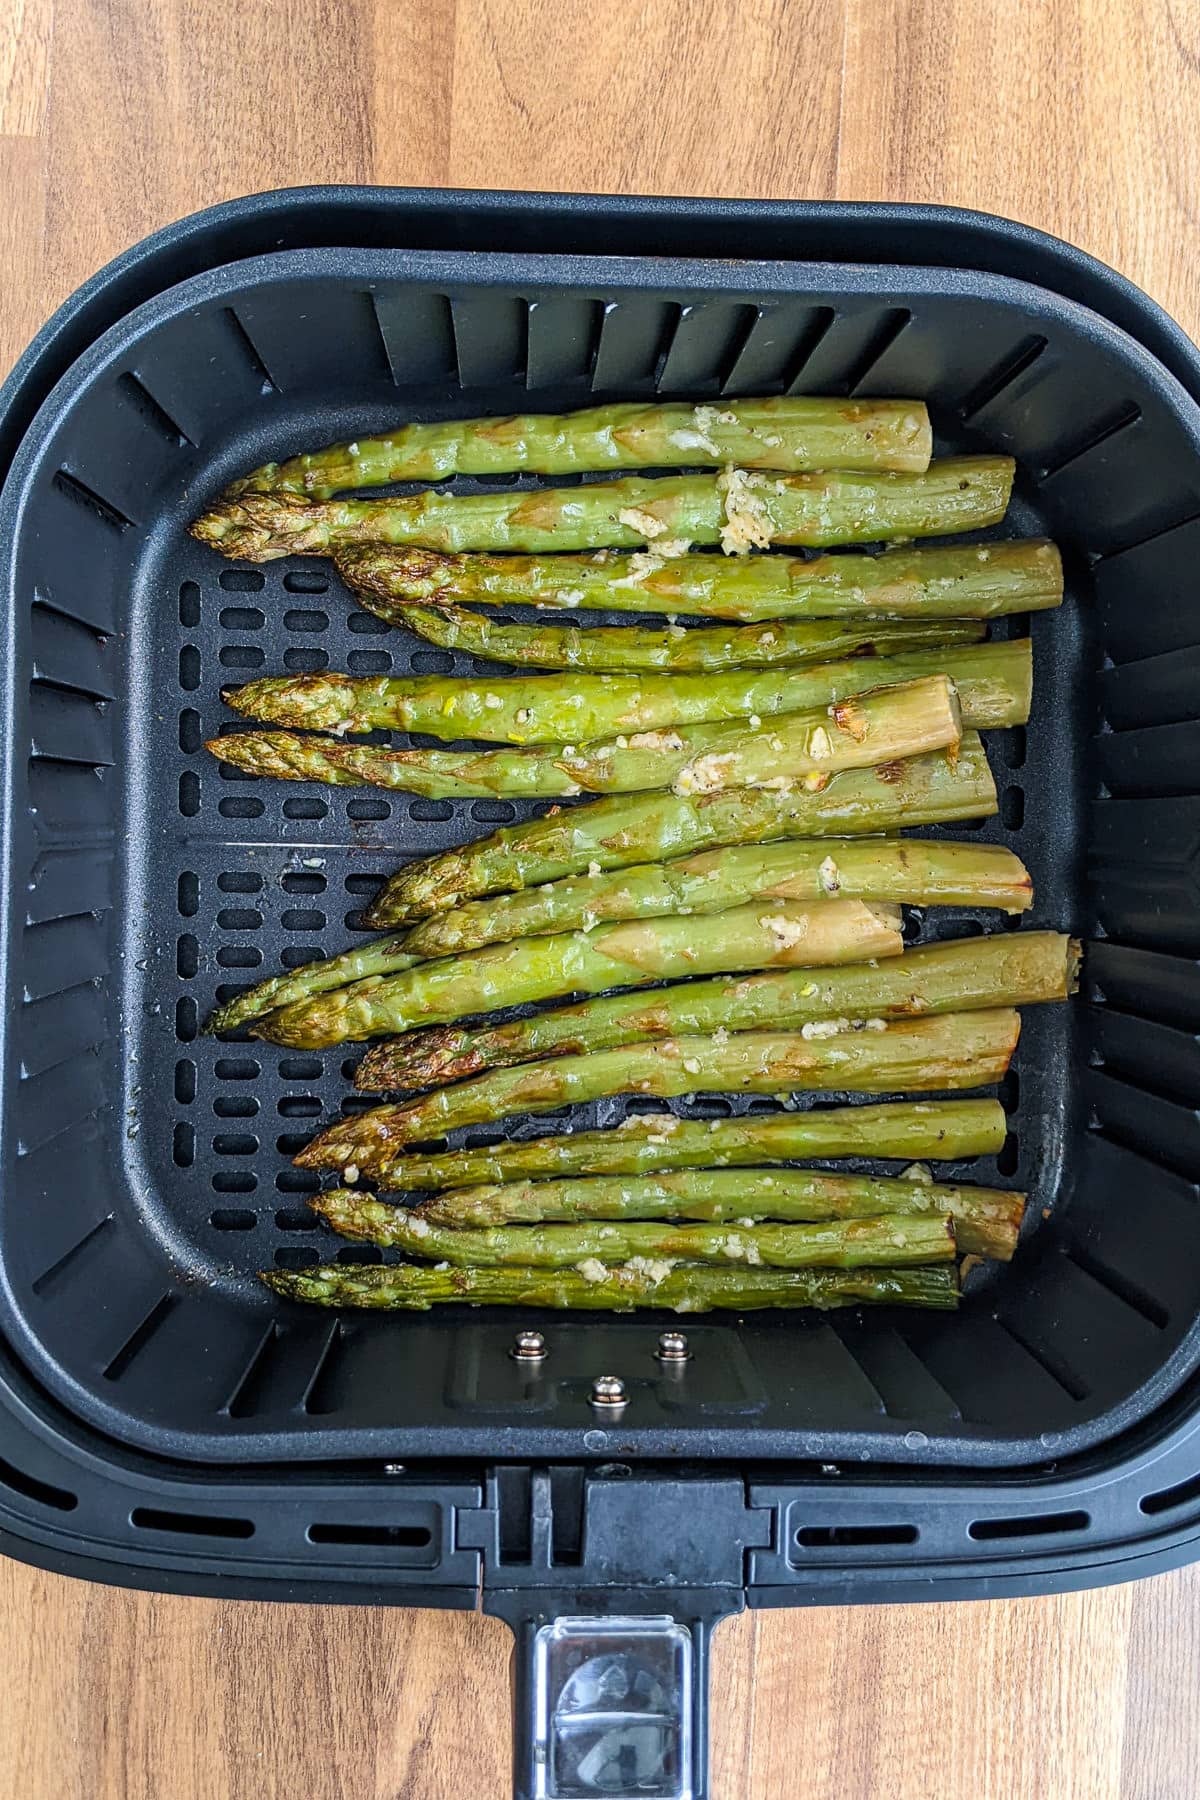 Top view of air fryer basket with roasted asparagus